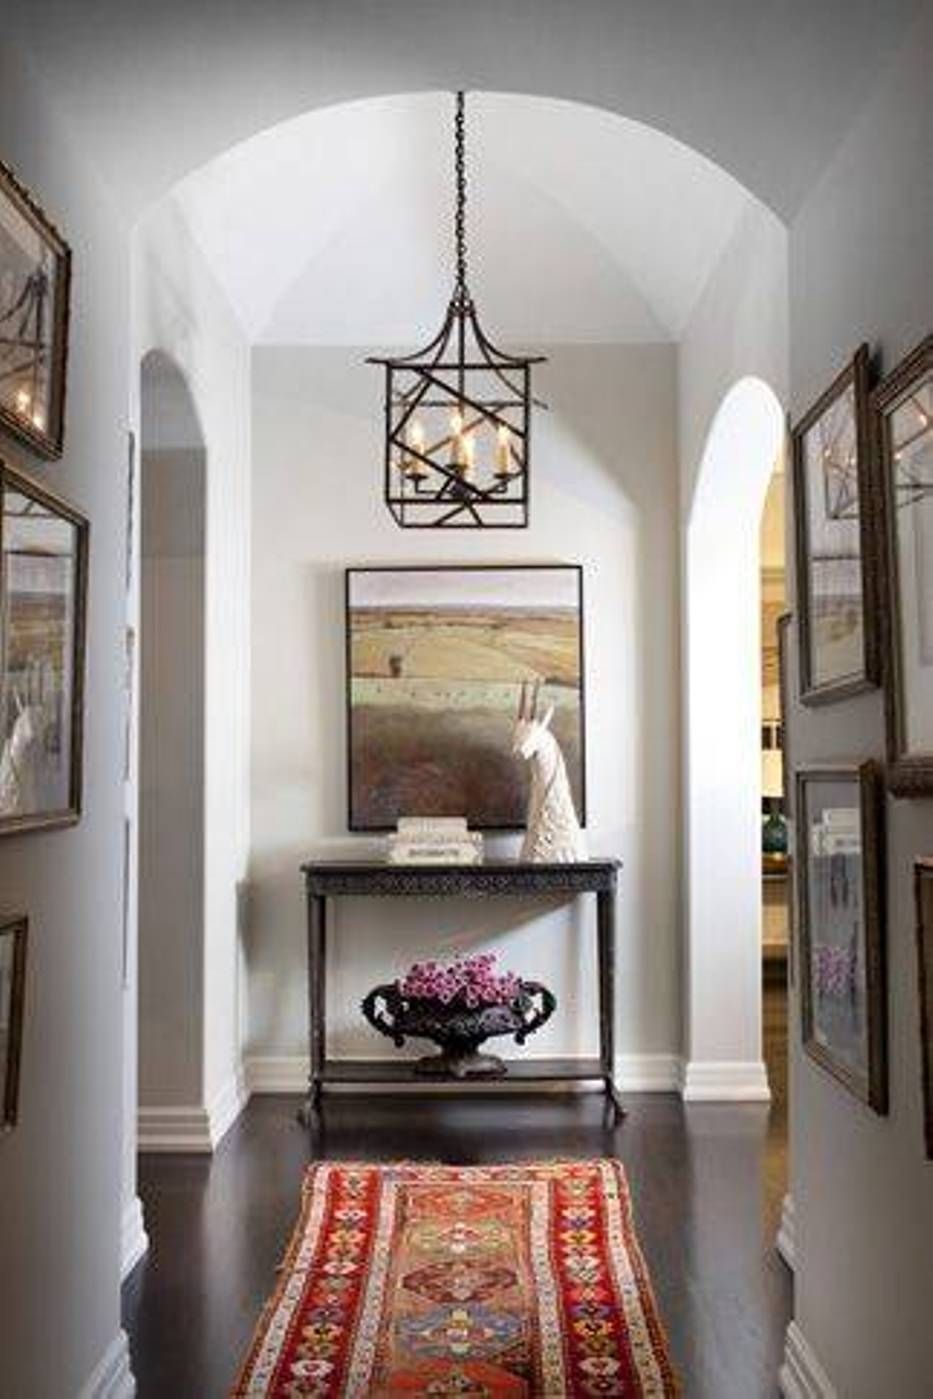 Amazing Foyer Pendant Lighting In Interior Decorating Ideas Glass With Entryway Pendant Lighting (View 6 of 15)